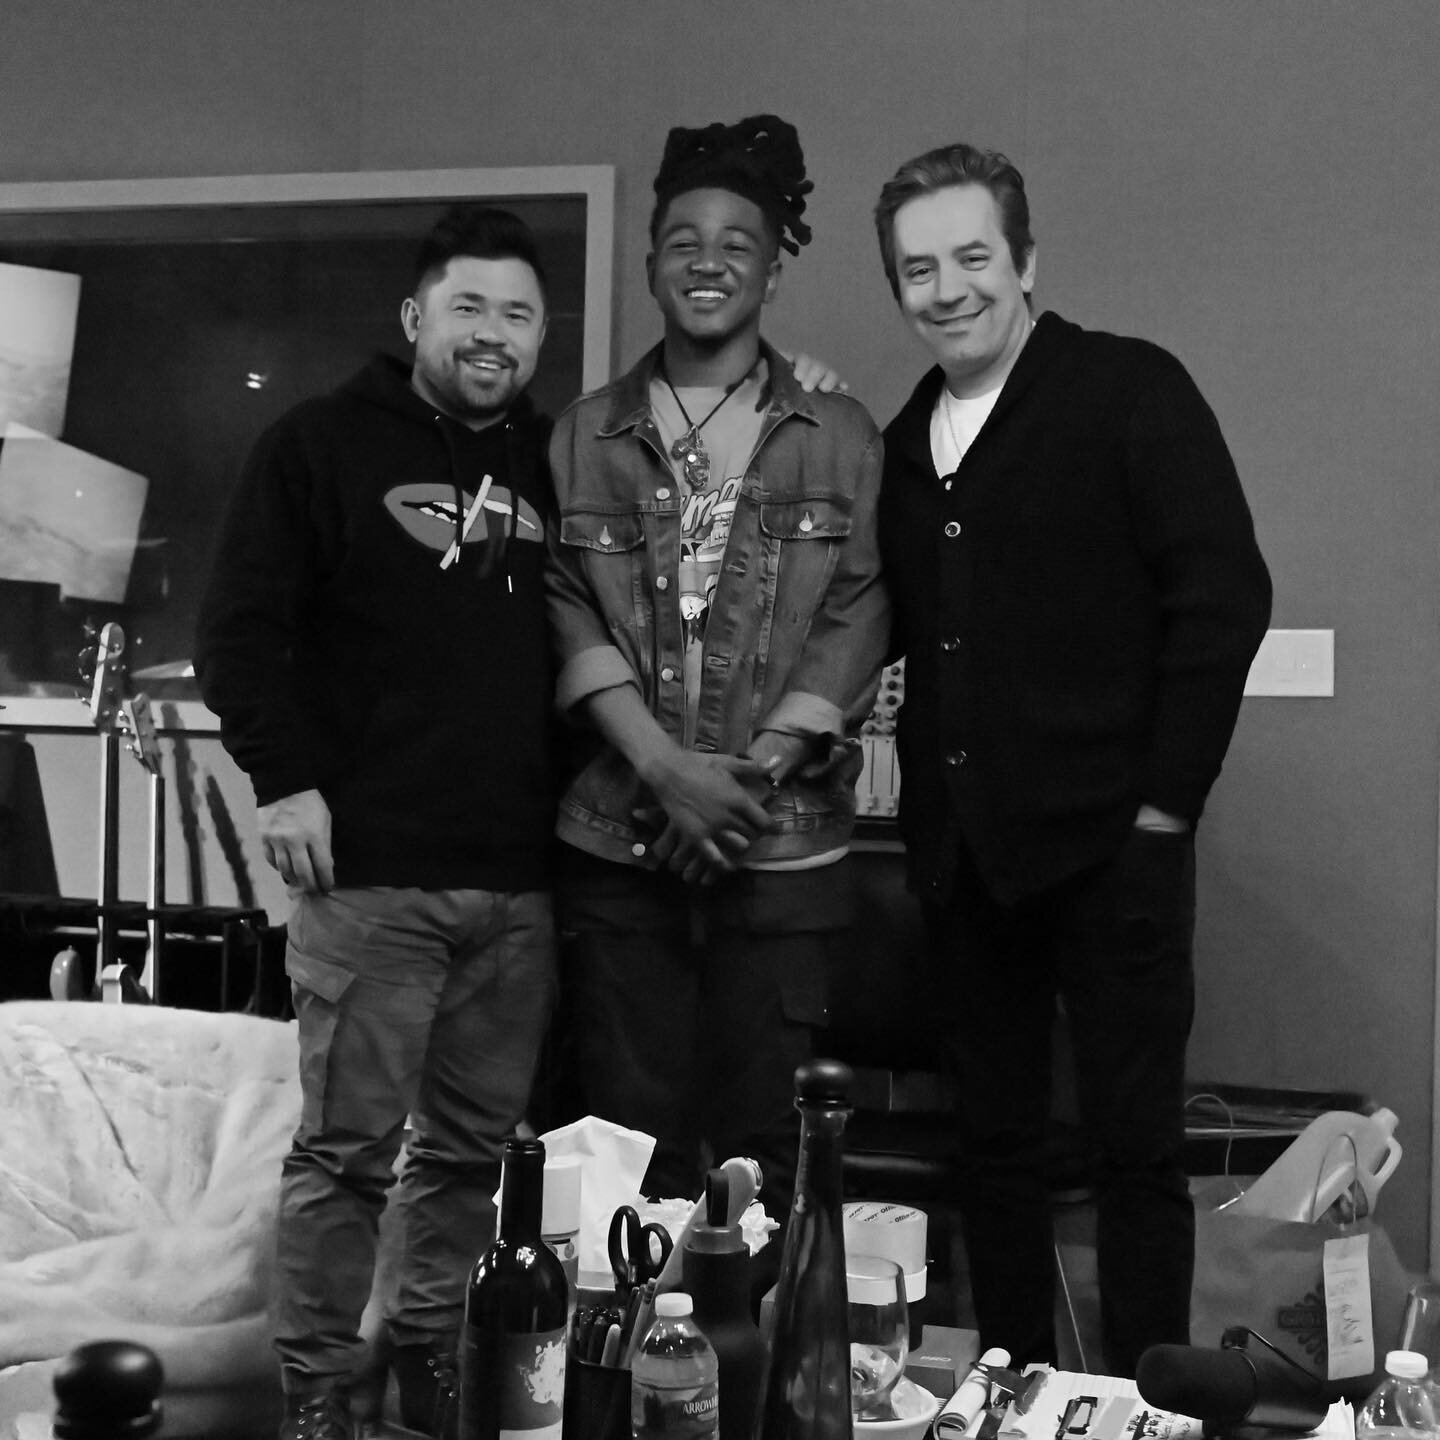 An amazing night for BNDWTH. What an honor to be @larrabeestudios with the phenomenal @malayho and @mannymarroquin #BNDWTH #DAY1